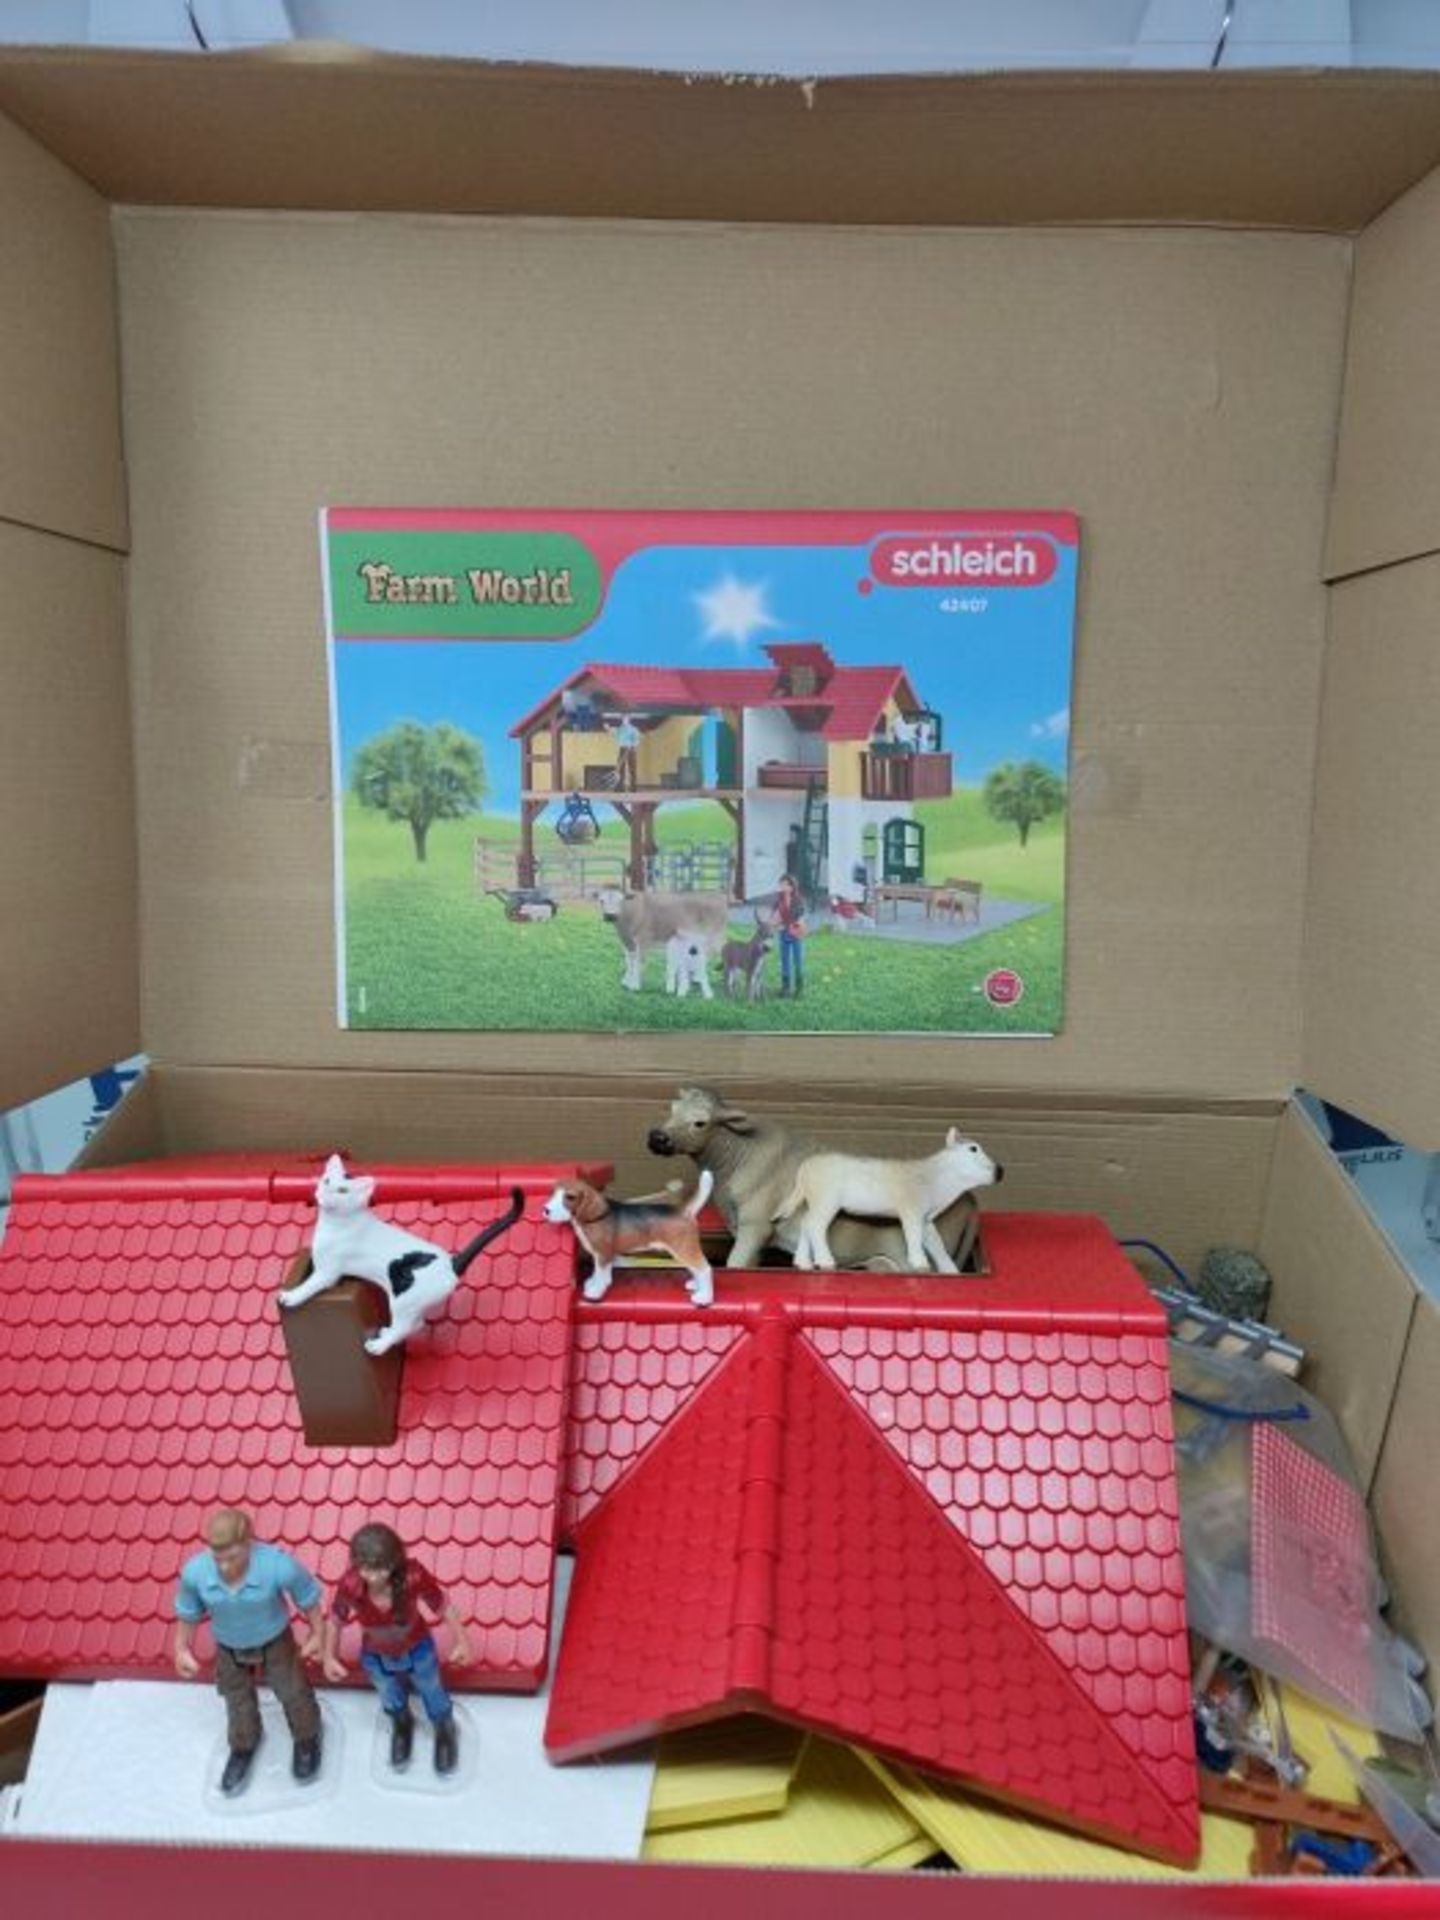 RRP £59.00 SCHLEICH 42407n Large Farm House Farm World Toy Playset for children aged 3-8 Years - Image 3 of 3